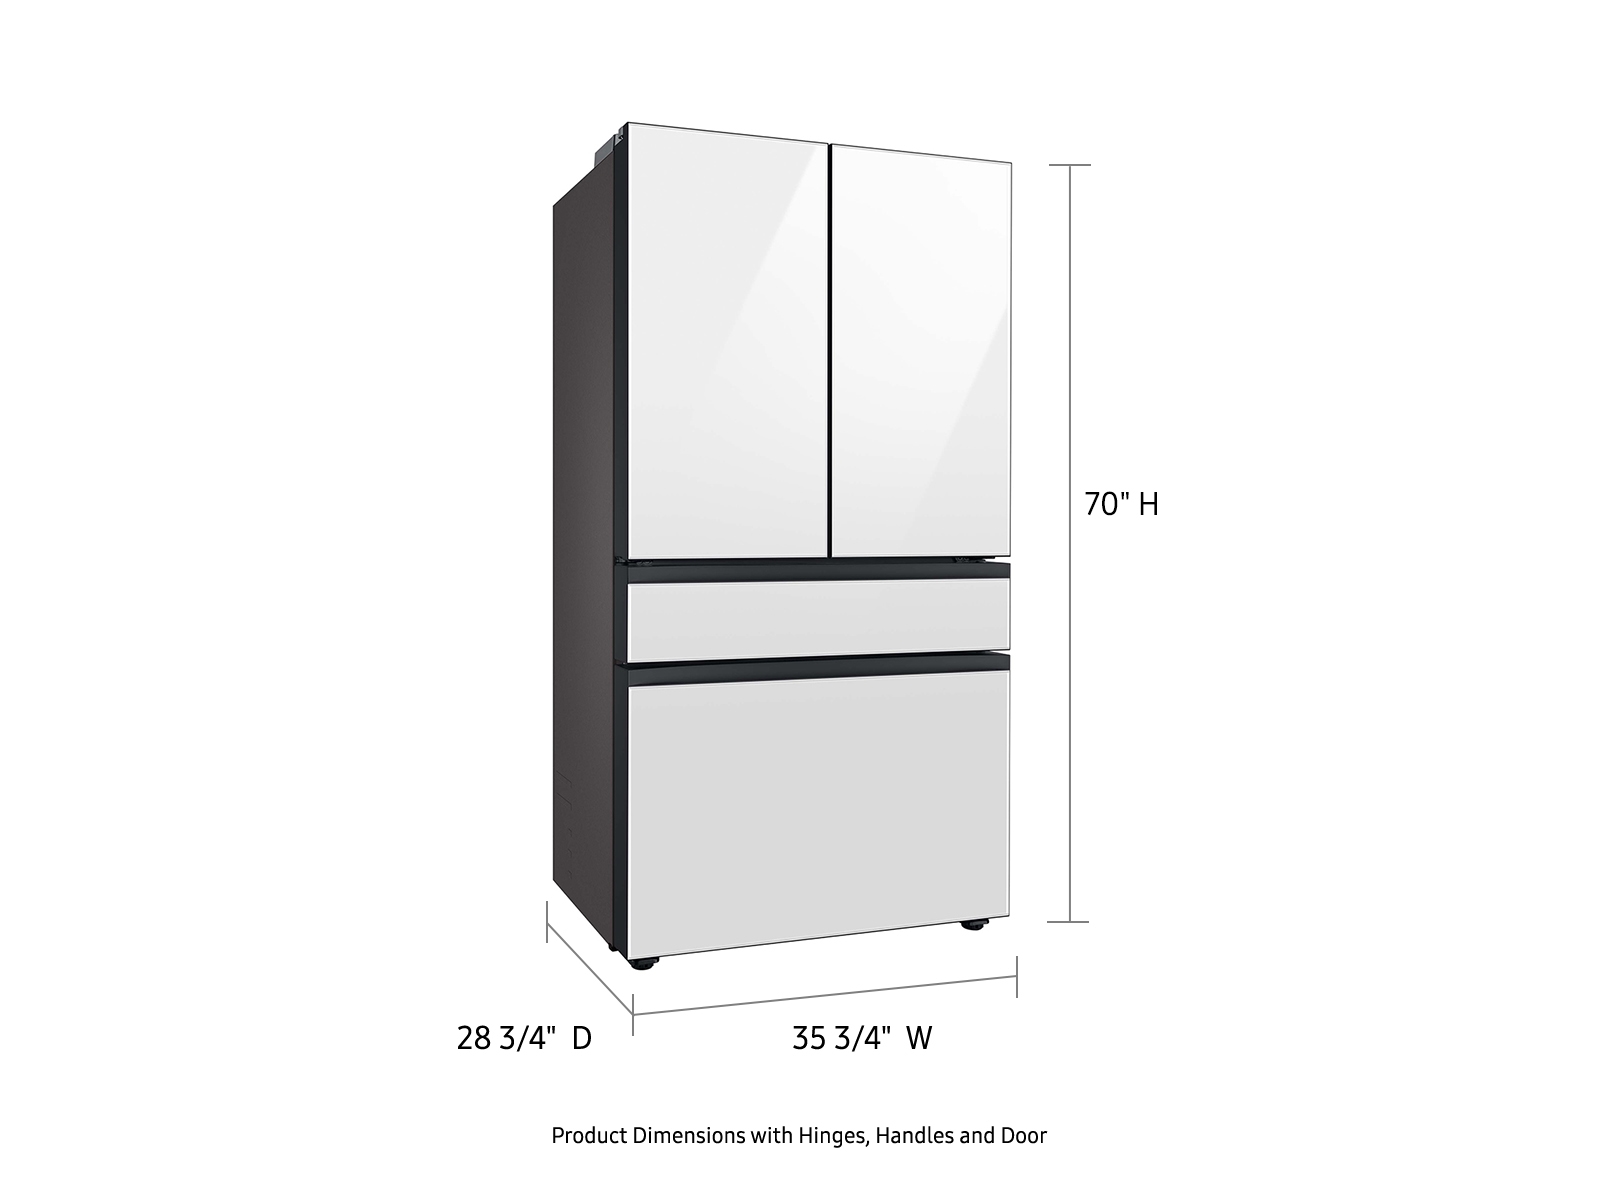 Thumbnail image of Bespoke 4-Door French Door Refrigerator (23 cu. ft.) with AutoFill Water Pitcher and Customizable Door Panel Colors in Morning Blue Glass Top Panels and White Glass Middle and Bottom Panels